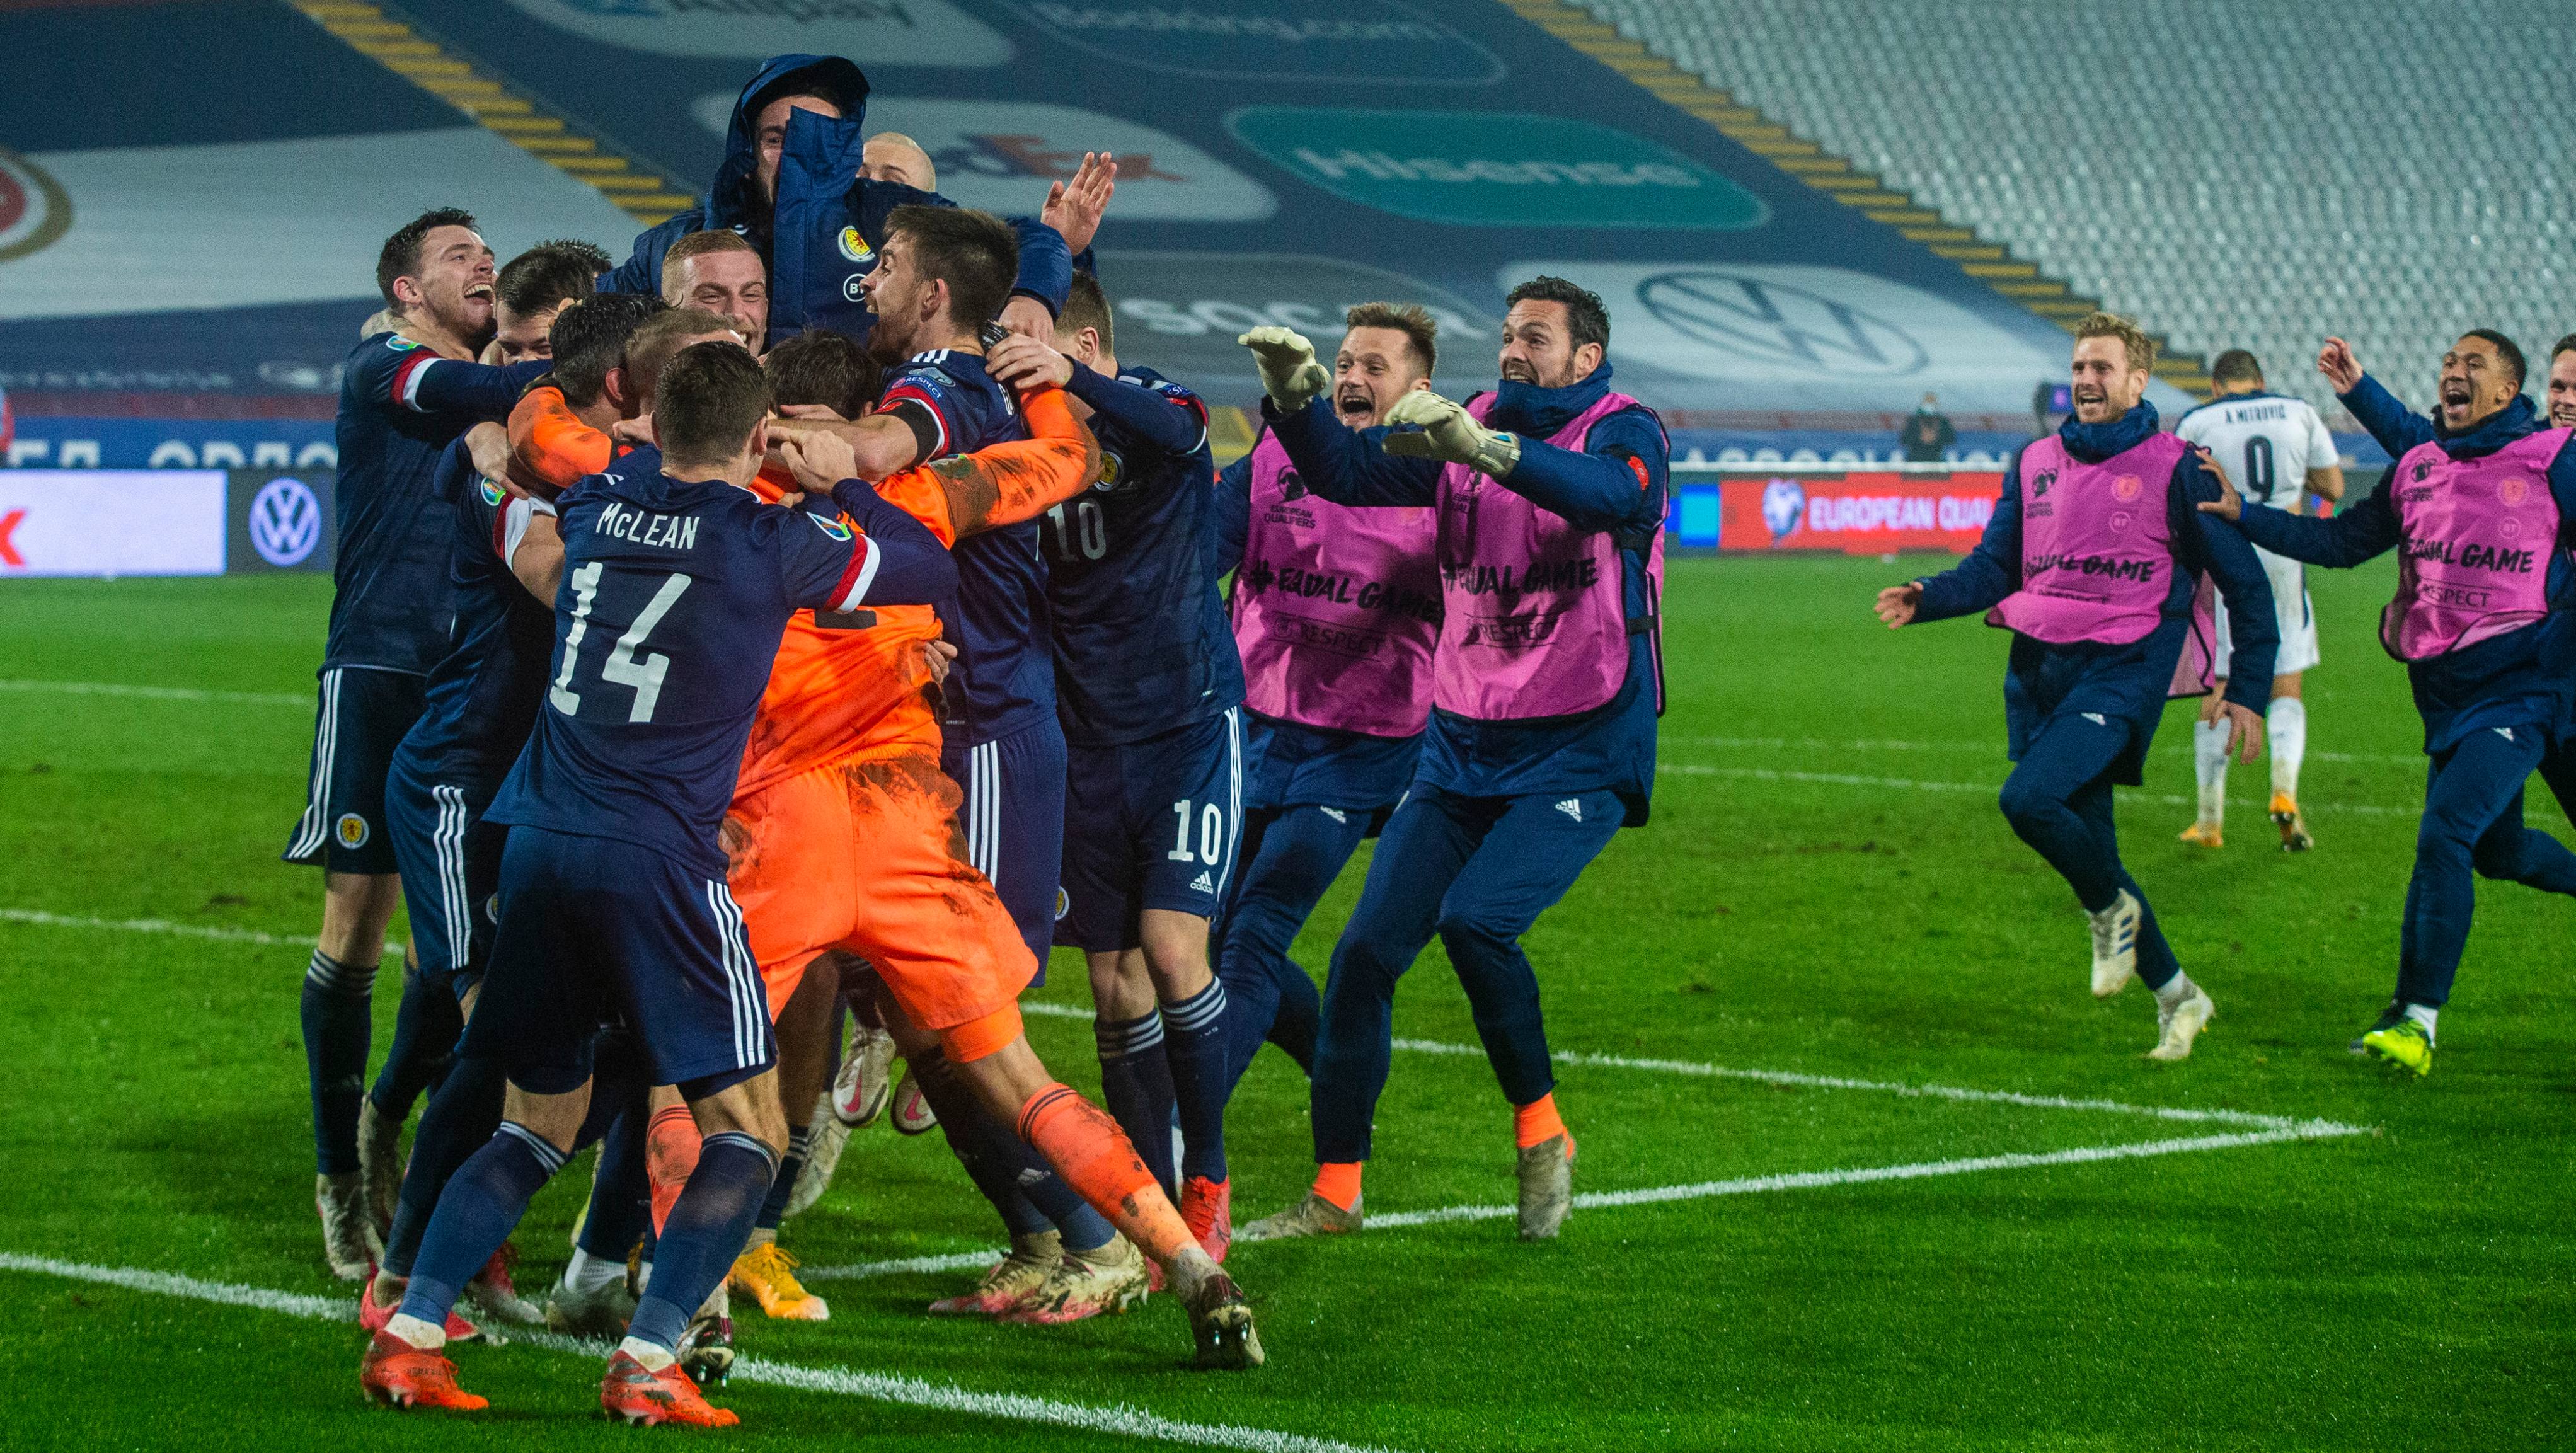 Scotland qualified for the last European Championships by beating Serbia in the play-off final. (Photo by Nikola Krstic / SNS Group)